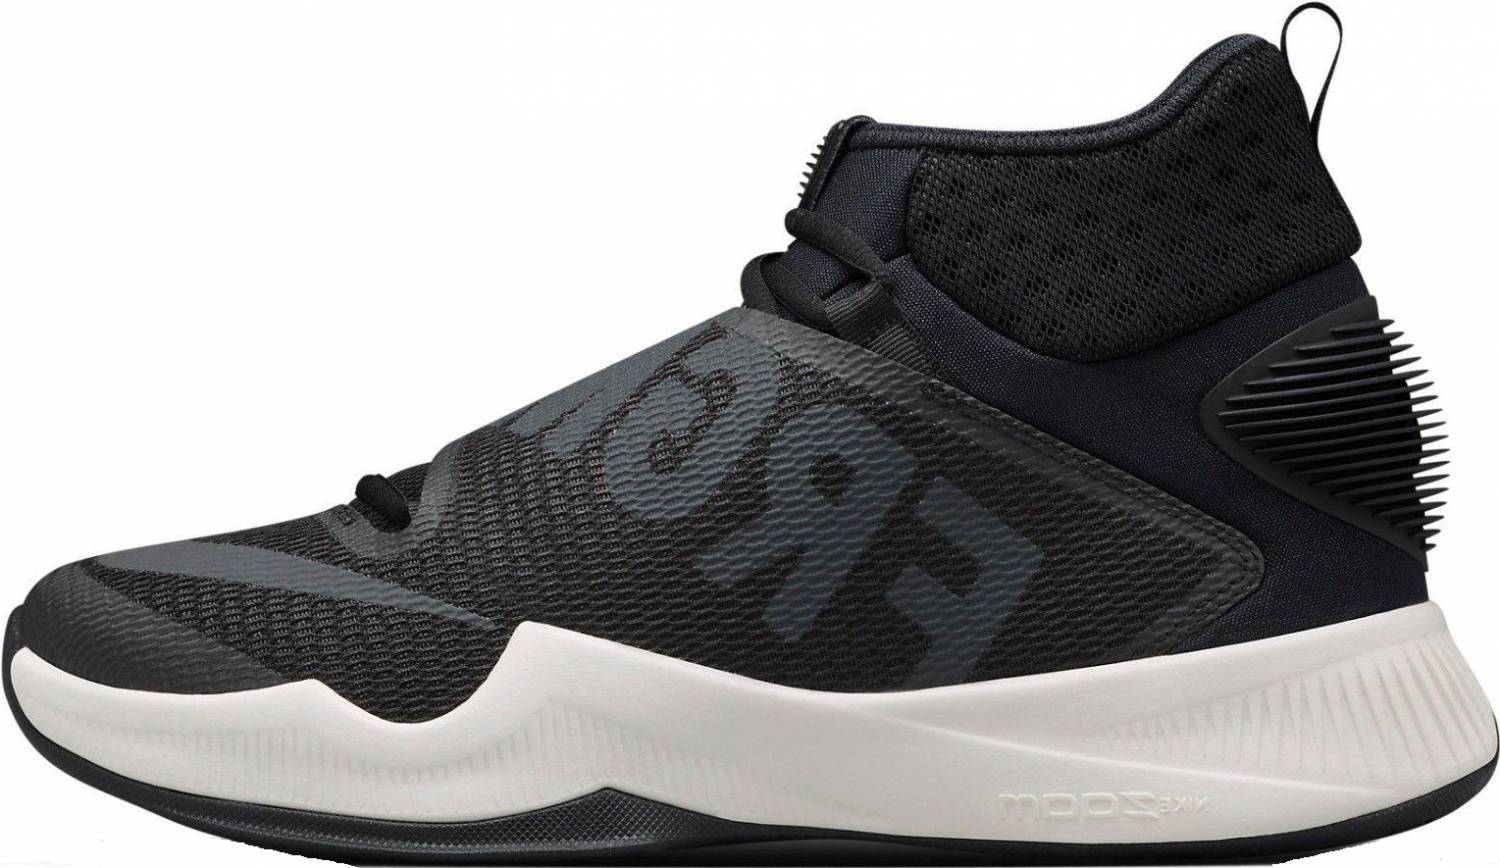 Nike HyperRev 2016 Review 2023, Facts, Deals | RunRepeat